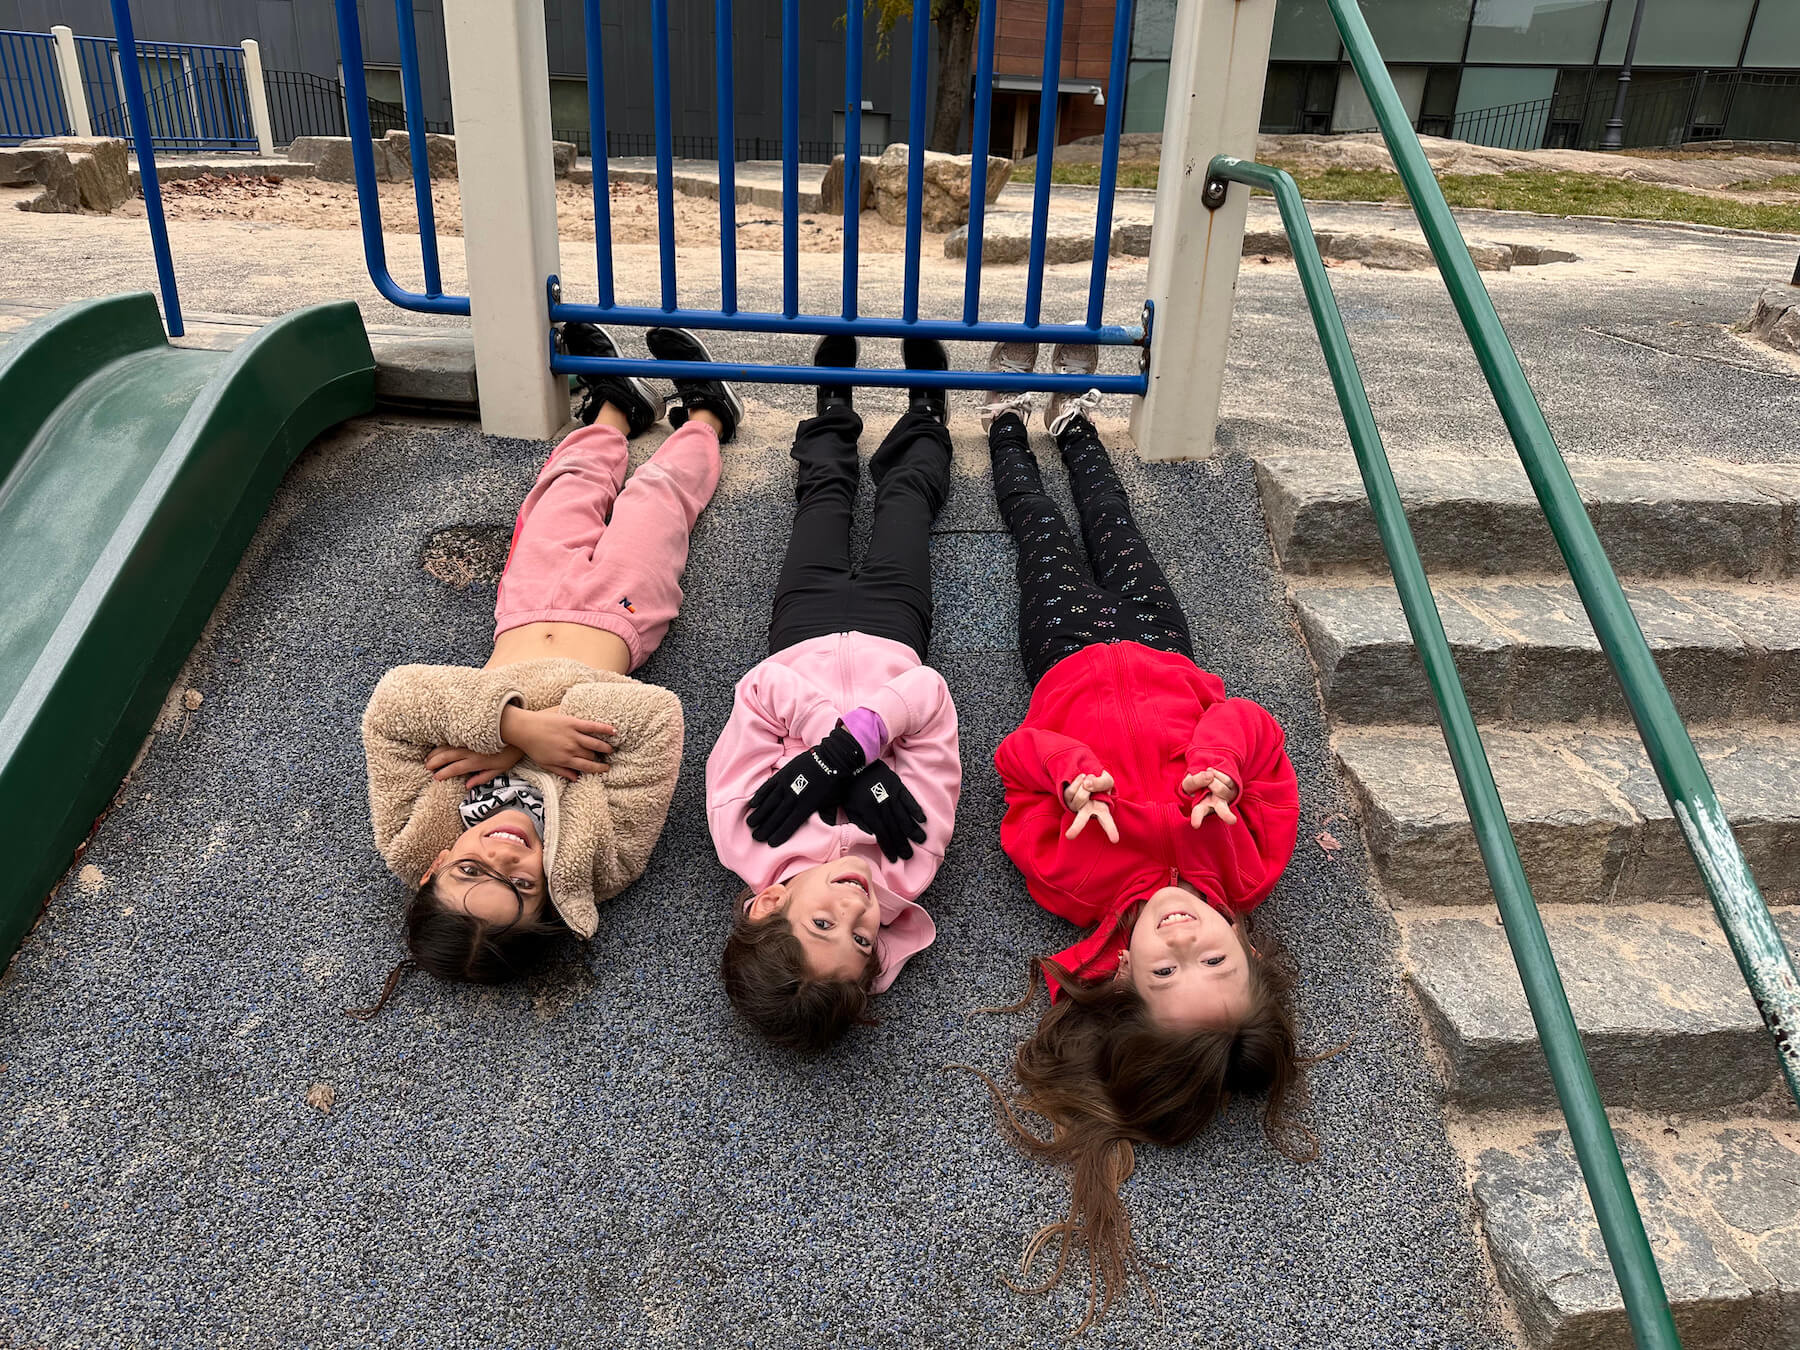 Ethical Culture Fieldston School_Feel Good Photos_Fieldston Lower students pretend to be bats on playground